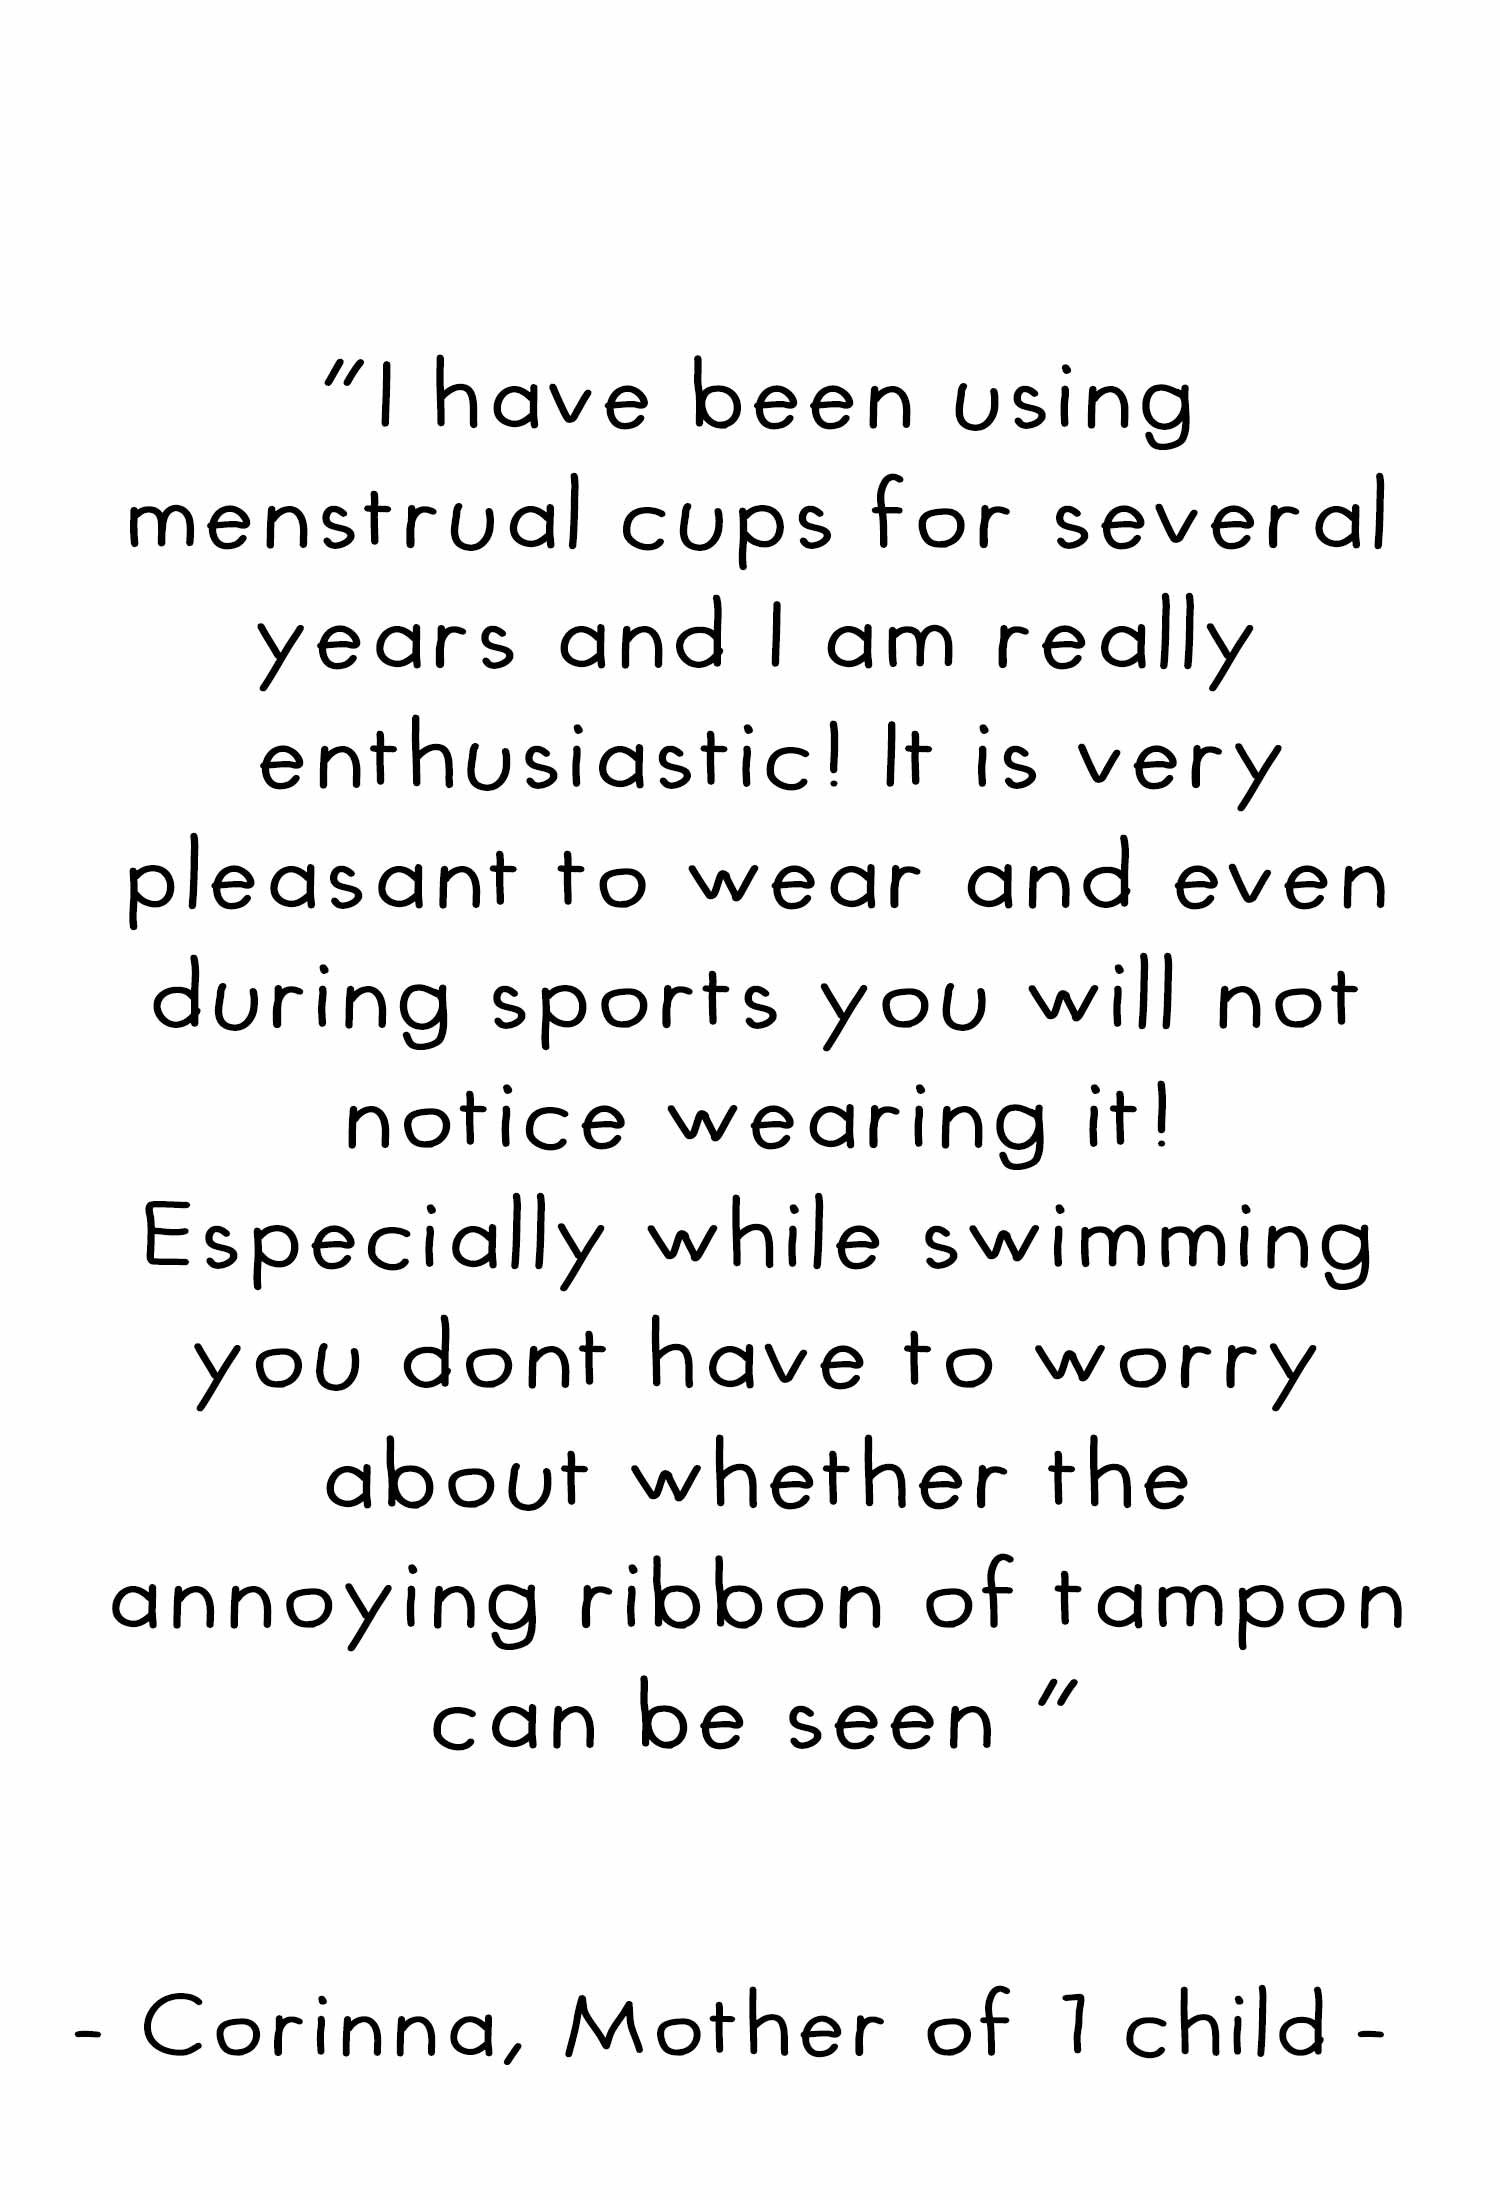 I have been using menstrual cups for several years and I am really enthusiastic. It is very pleasant to wear and even during sports you will not notice wearing it! Especially while swimming you don't have to worry about whether the annoying ribbon of tamp